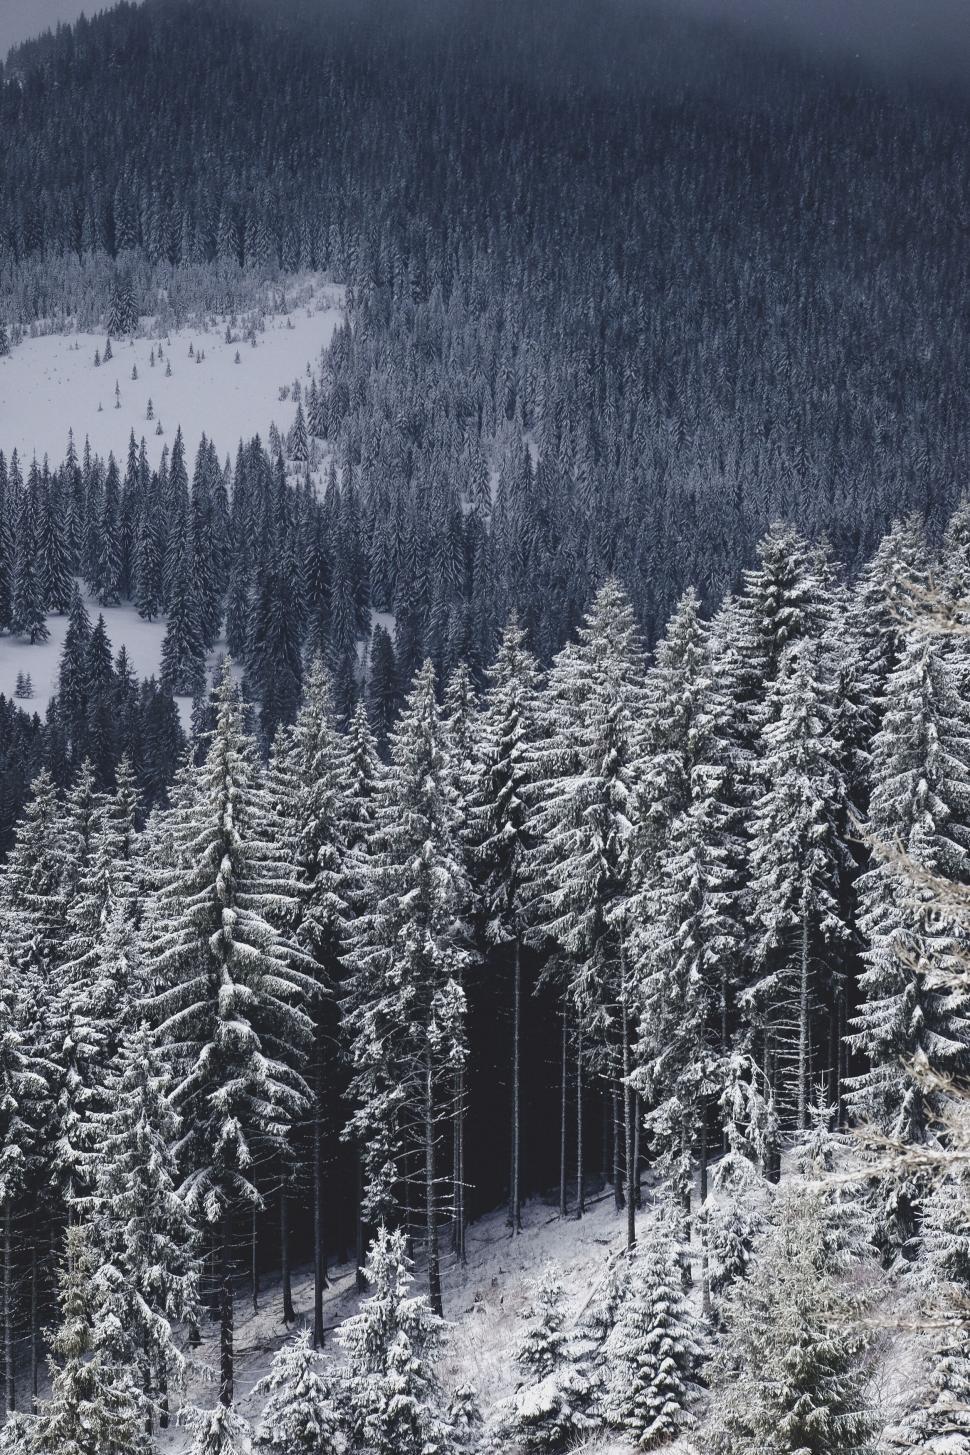 Free Image of Snowy pine forest under winter sky 